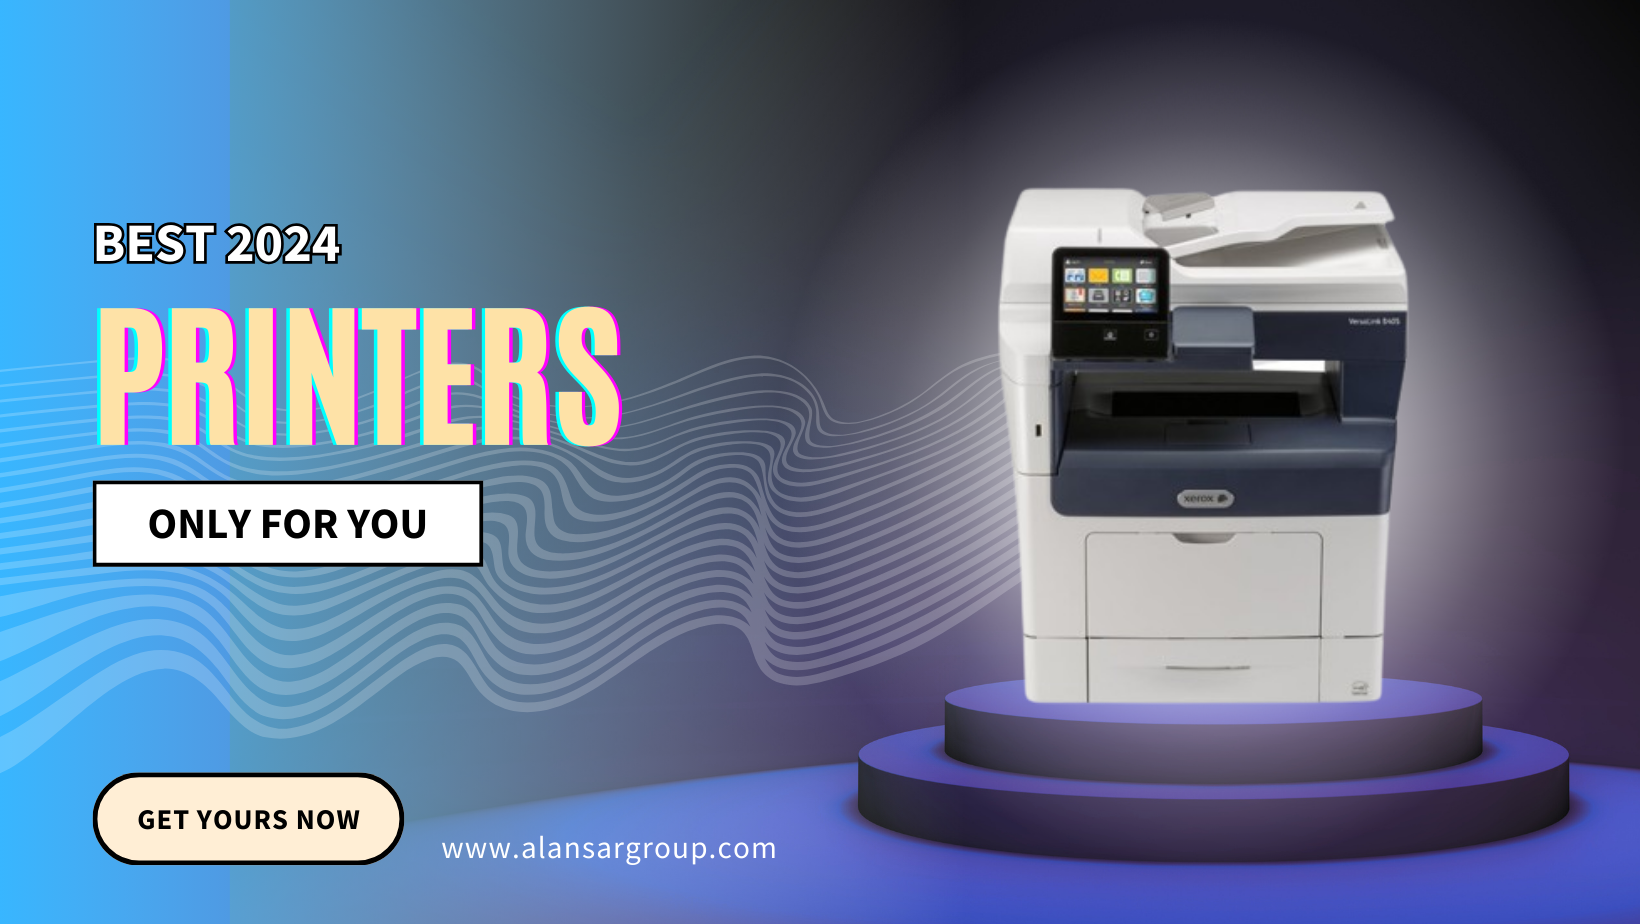 The best printers from Xerox in 2024